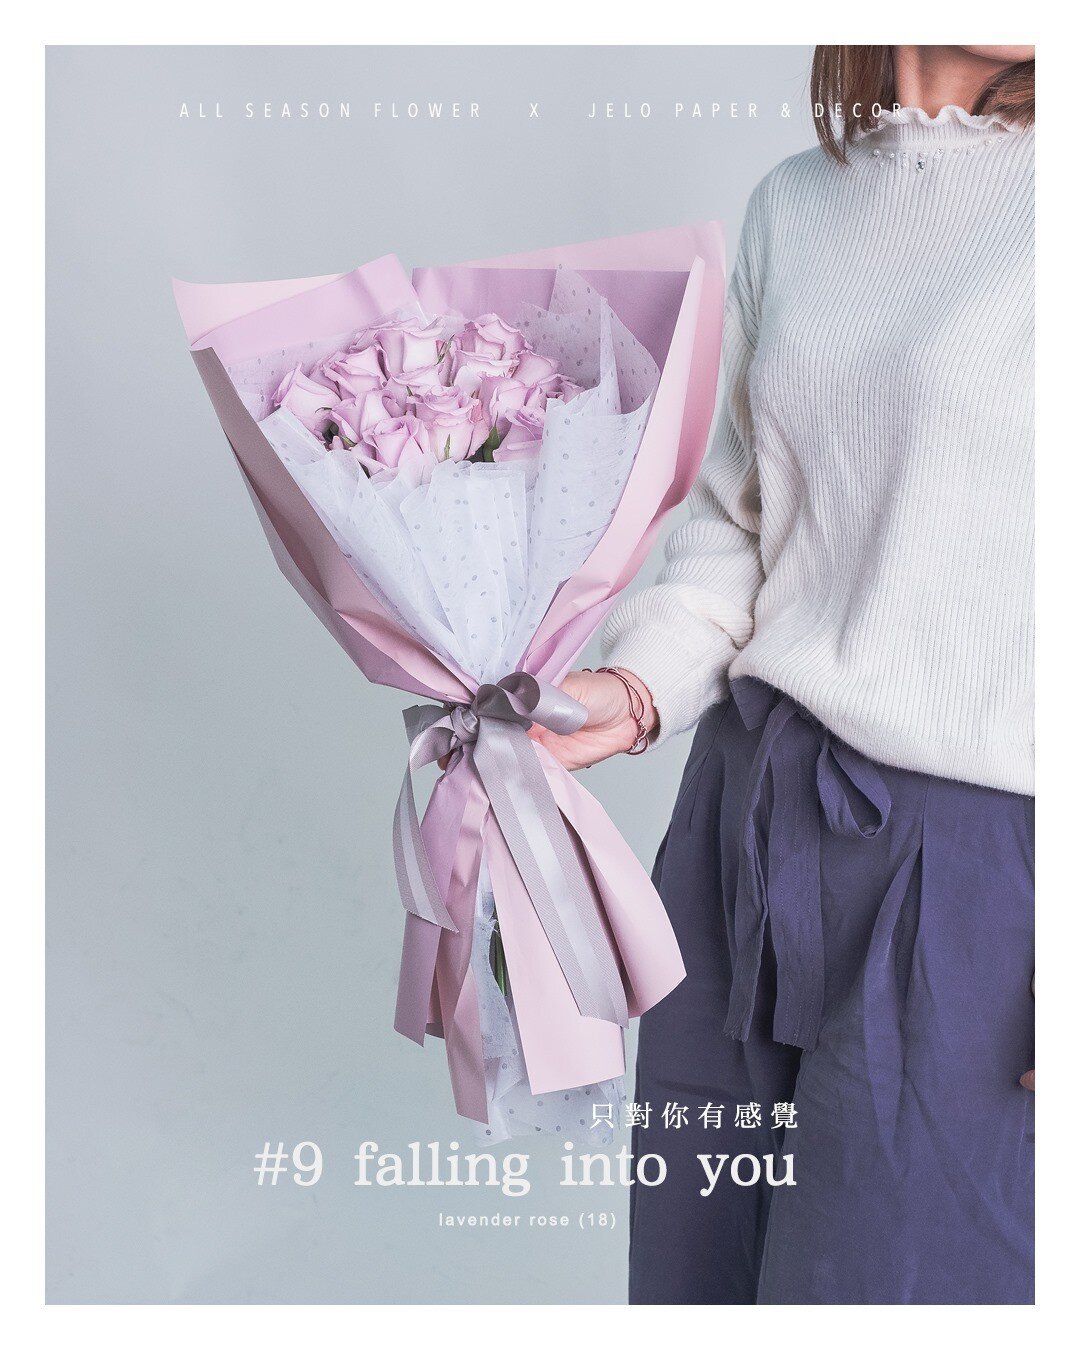 🌷 Valentine's flowers collection

#9 Falling into you 
只對你有感覺

15% off (1/4 - 1/25)

Free! Lyrics message card

How to order : 
Message us or Online order : 
www.allseasonflower.com/vday21

$12 Delivery flat rate to 5 boroughs
Free pick up in Brookl